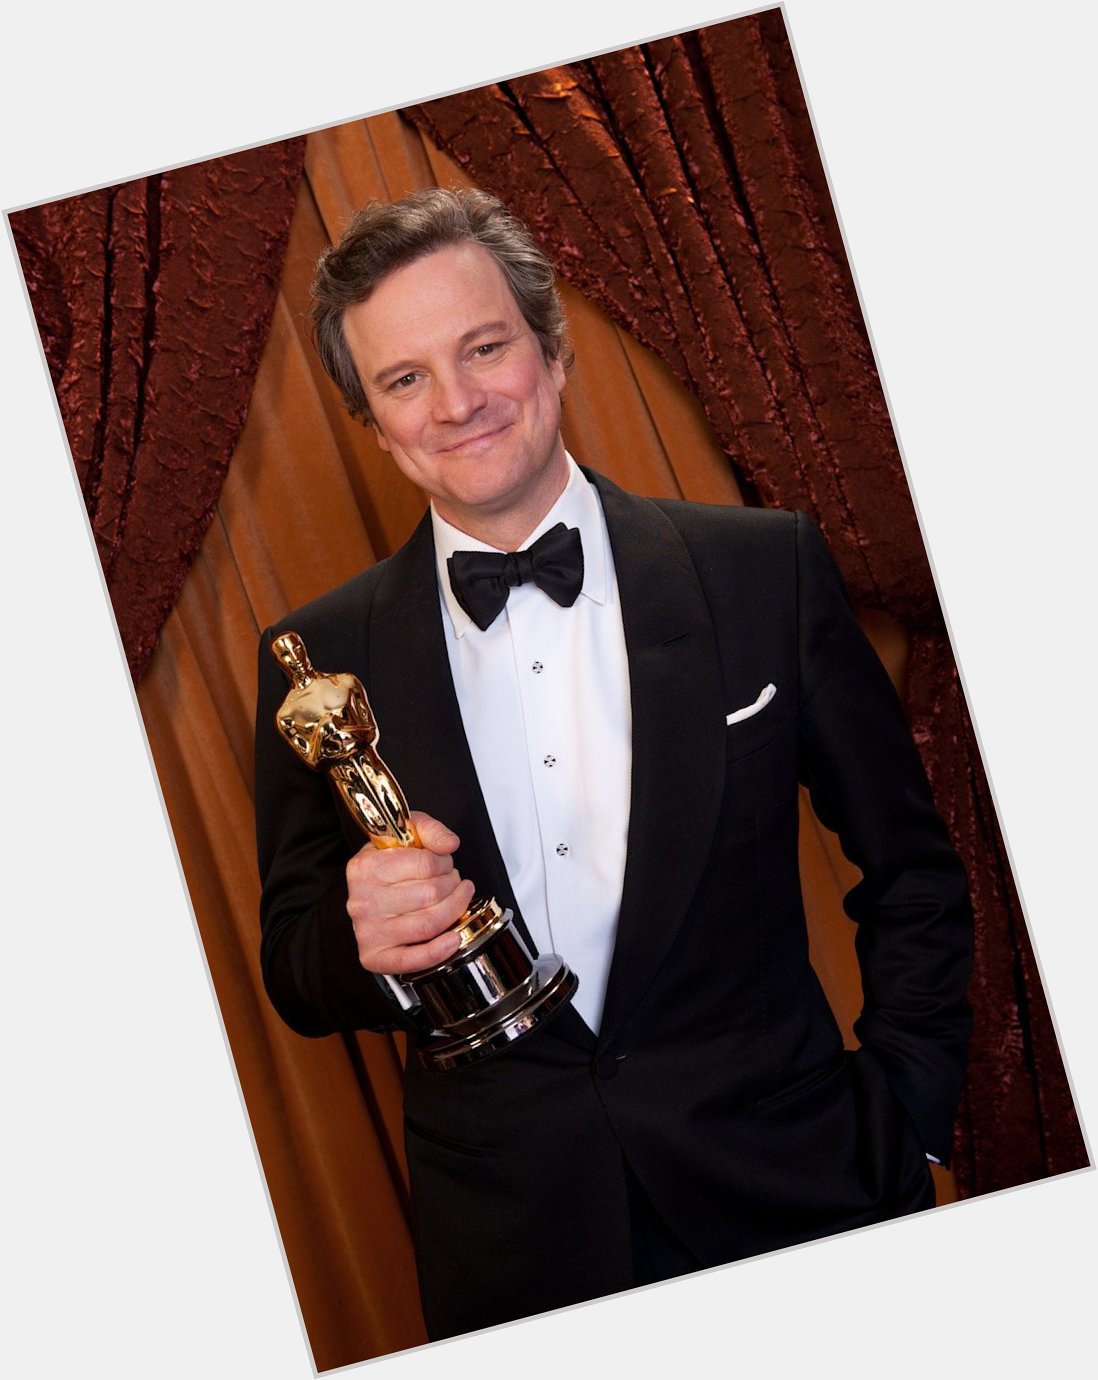 Happy Birthday to Colin Firth, who turns 57 today! 